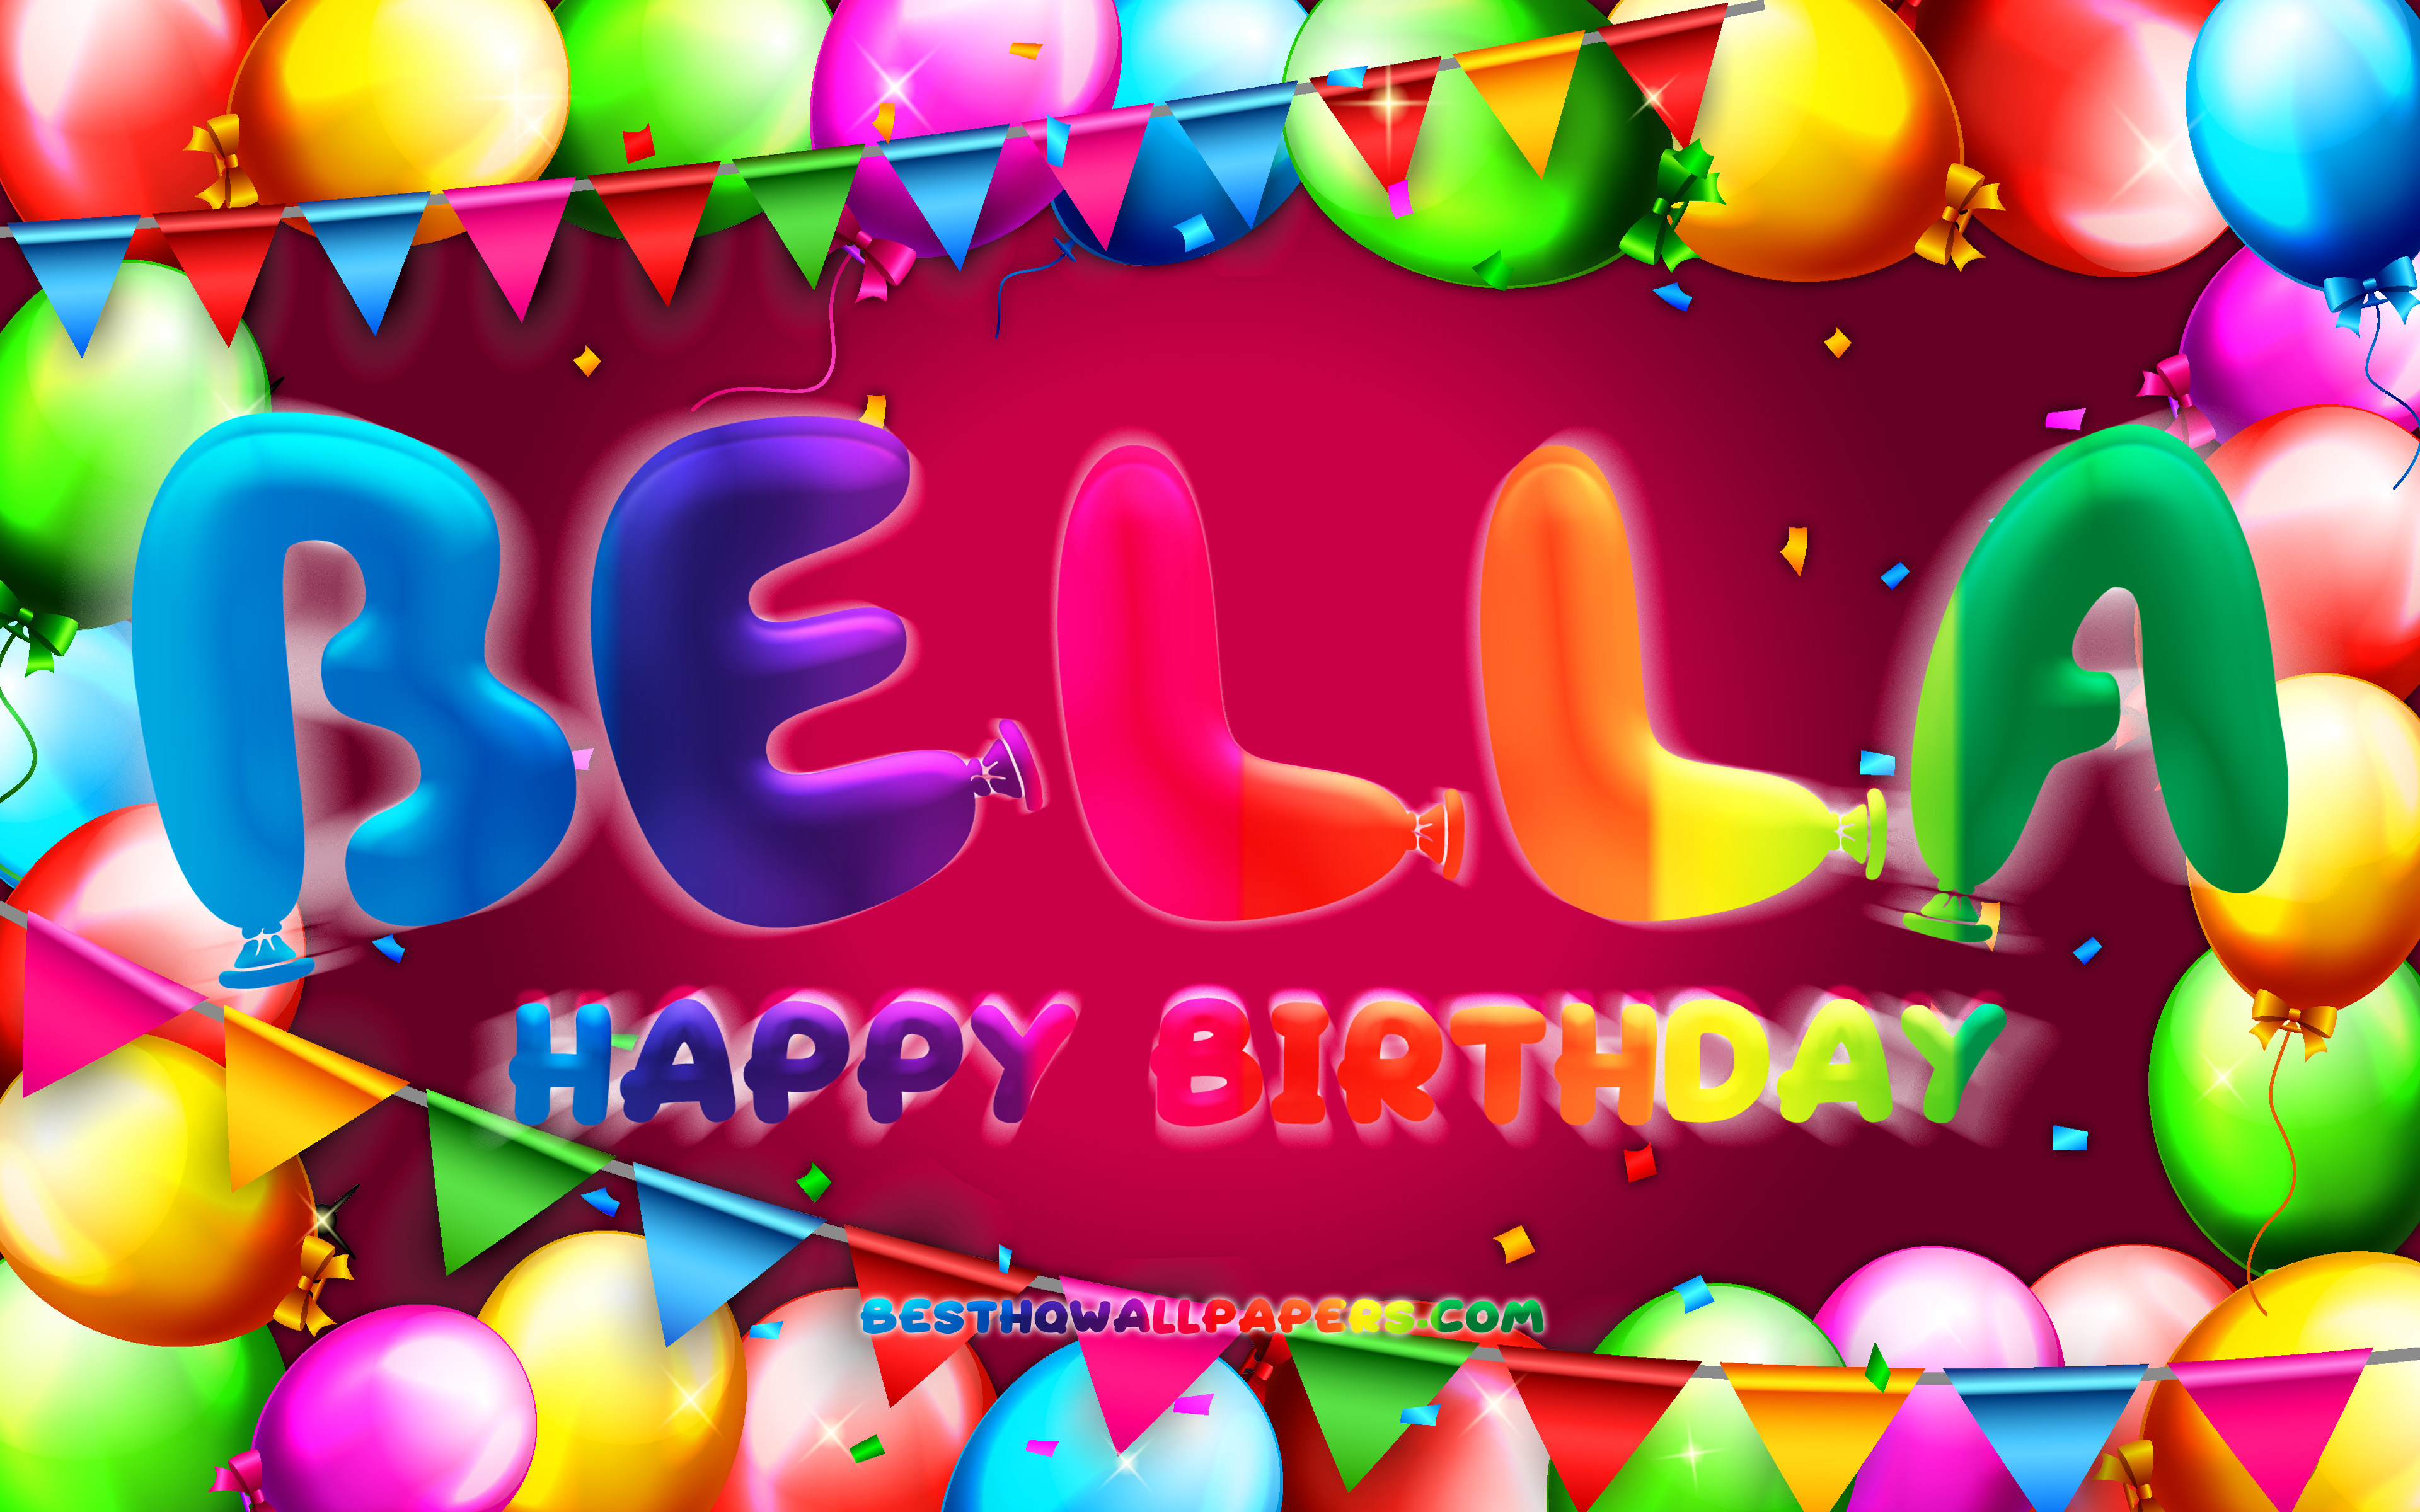 download-wallpapers-happy-birthday-bella-4k-colorful-balloon-frame